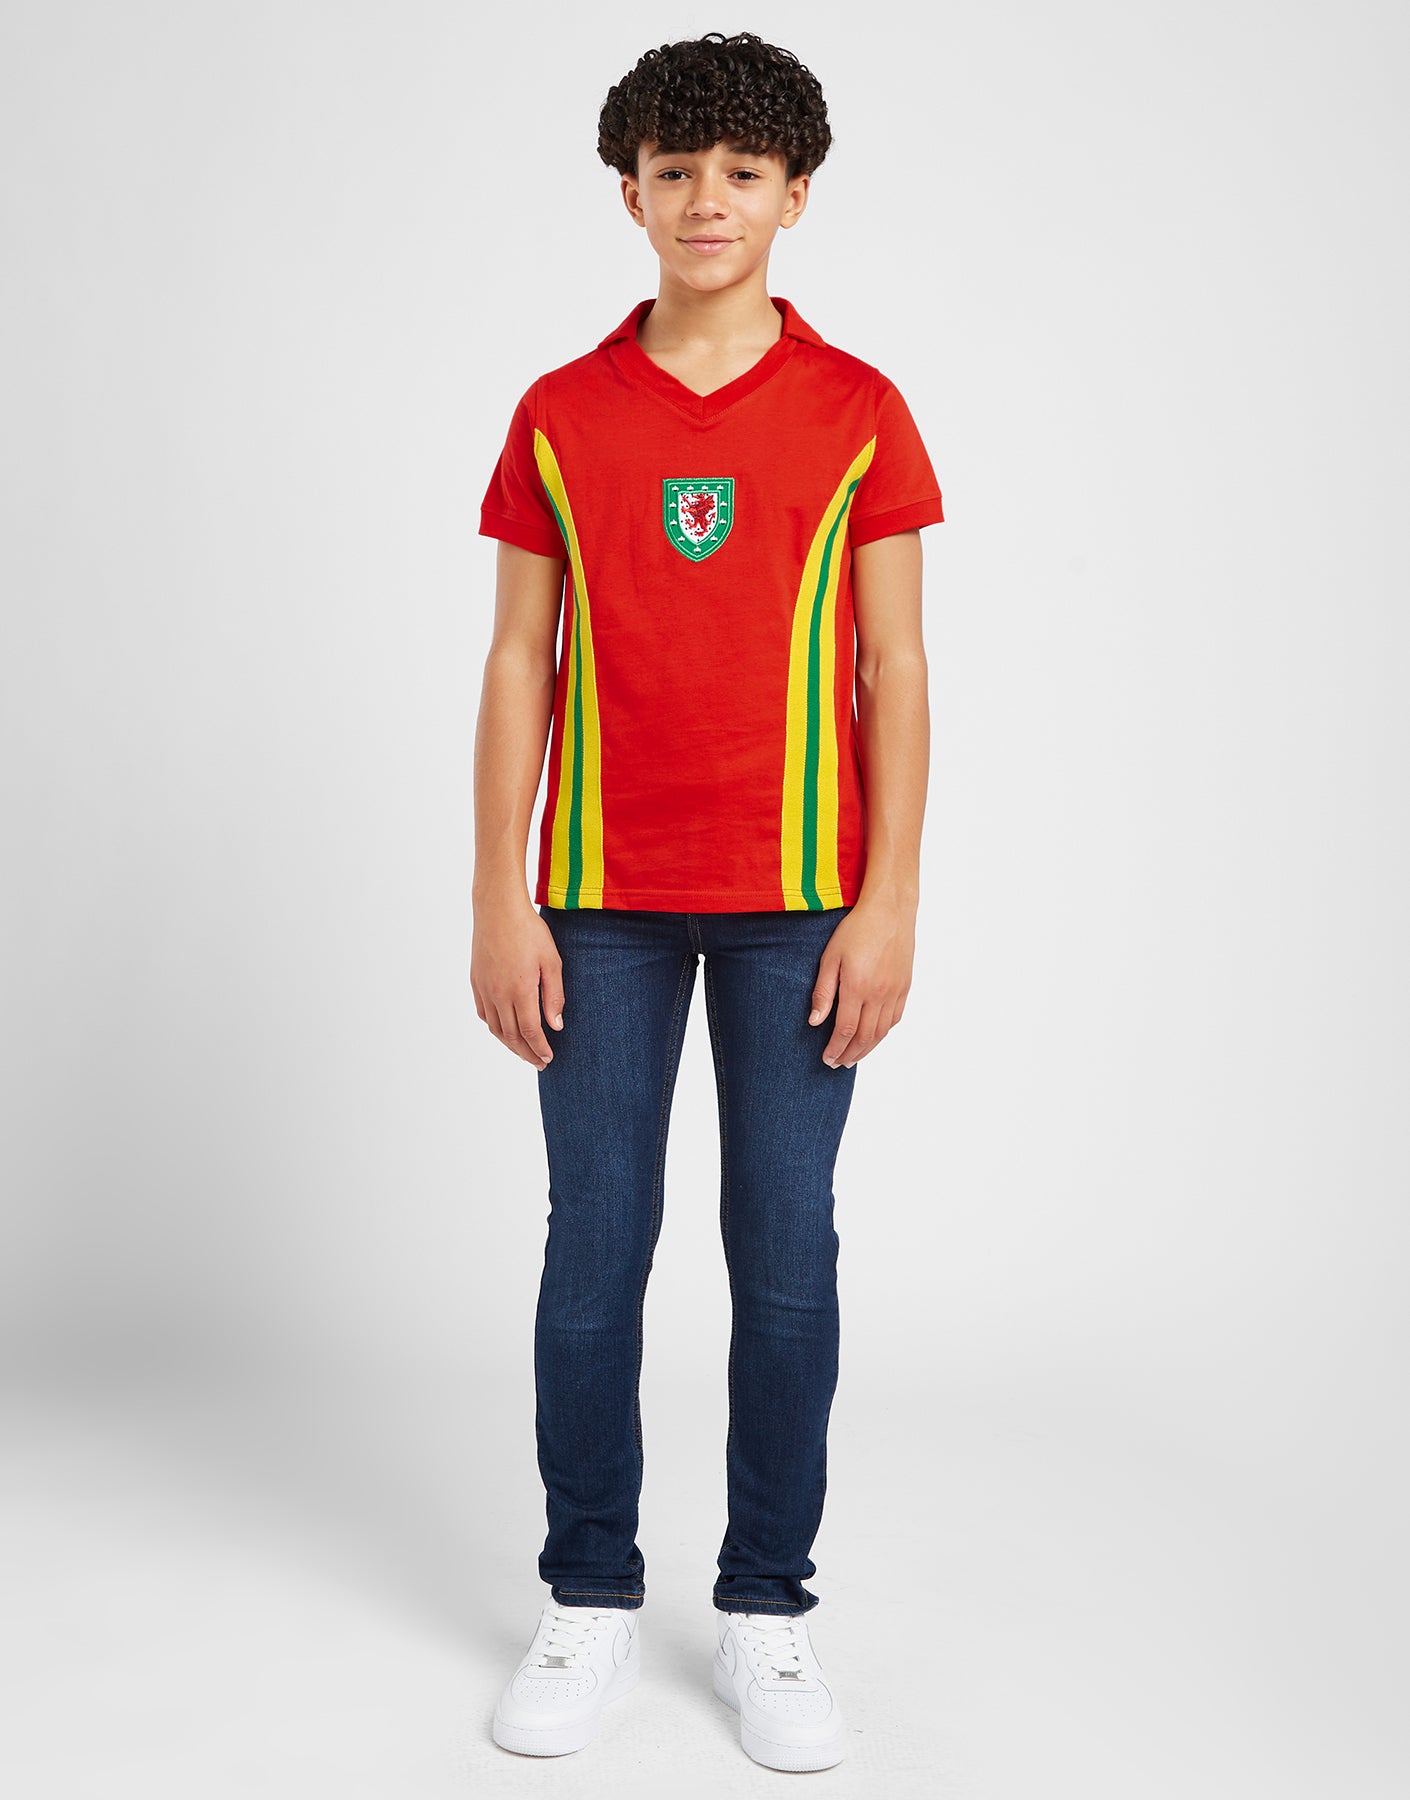 Official Team Wales Kids 1976 Retro Jersey - Red - The World Football Store